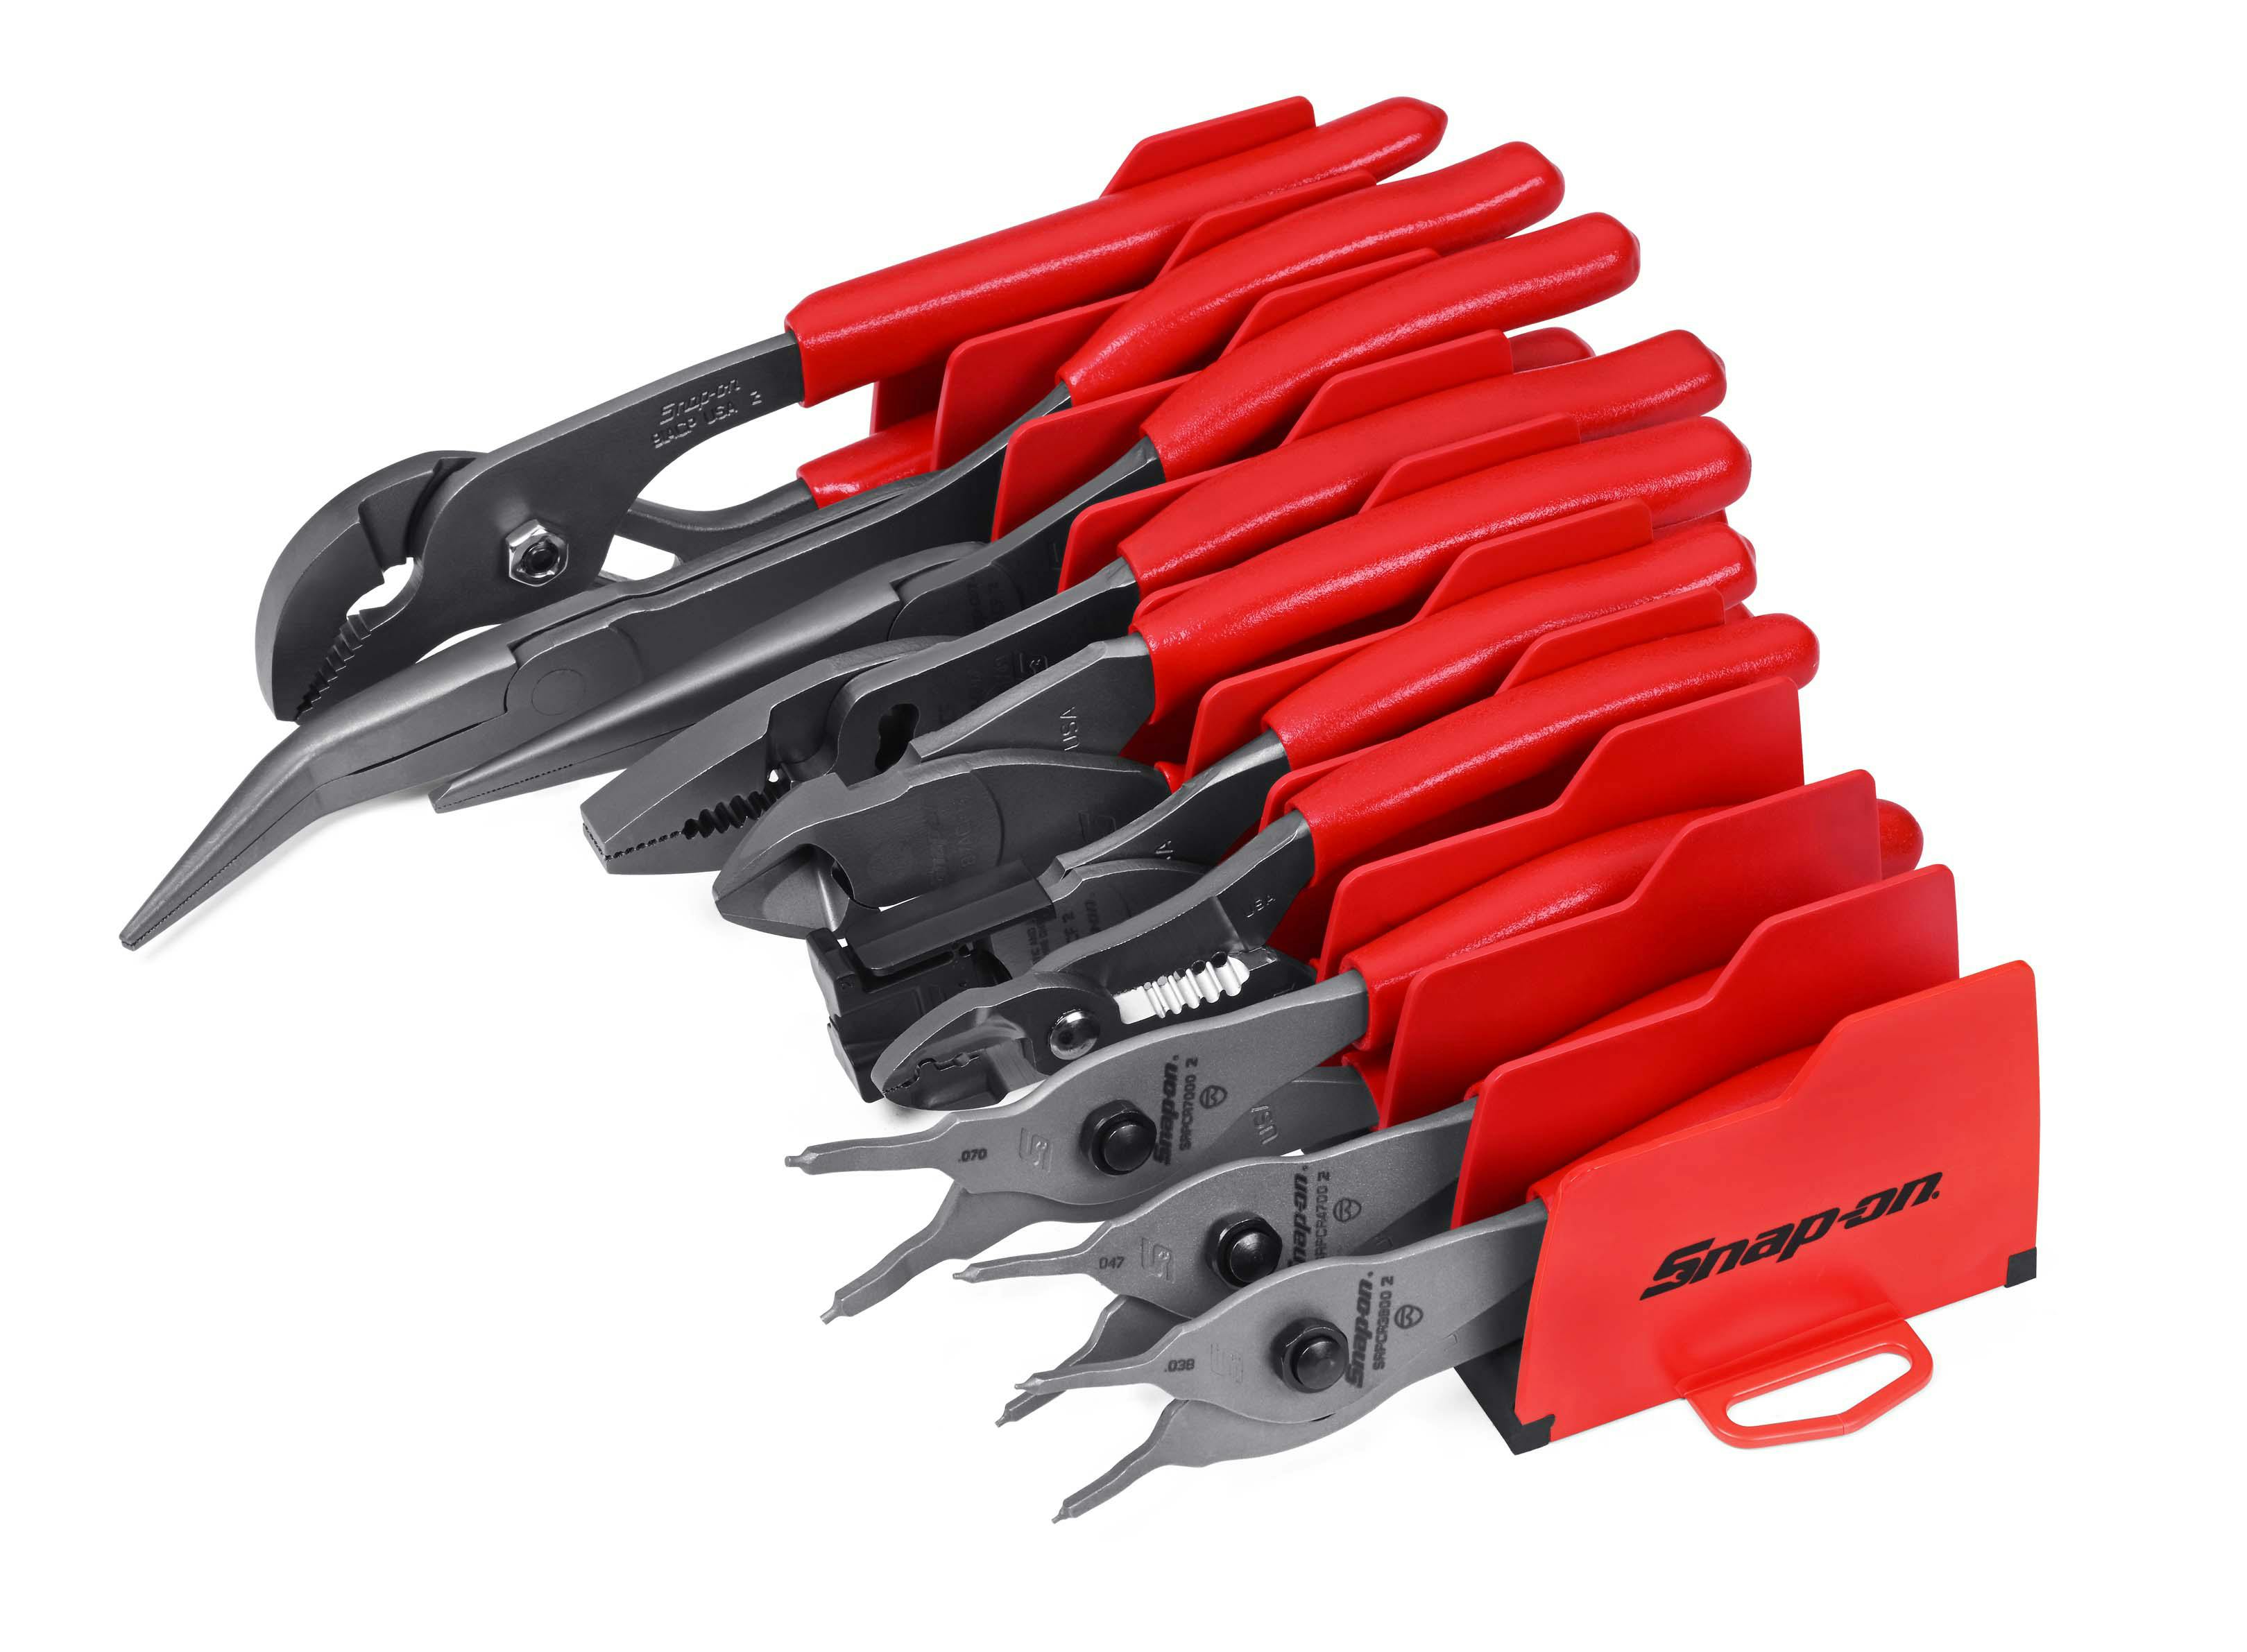 4 pc Pliers/Cutters Set (Red), PL400B